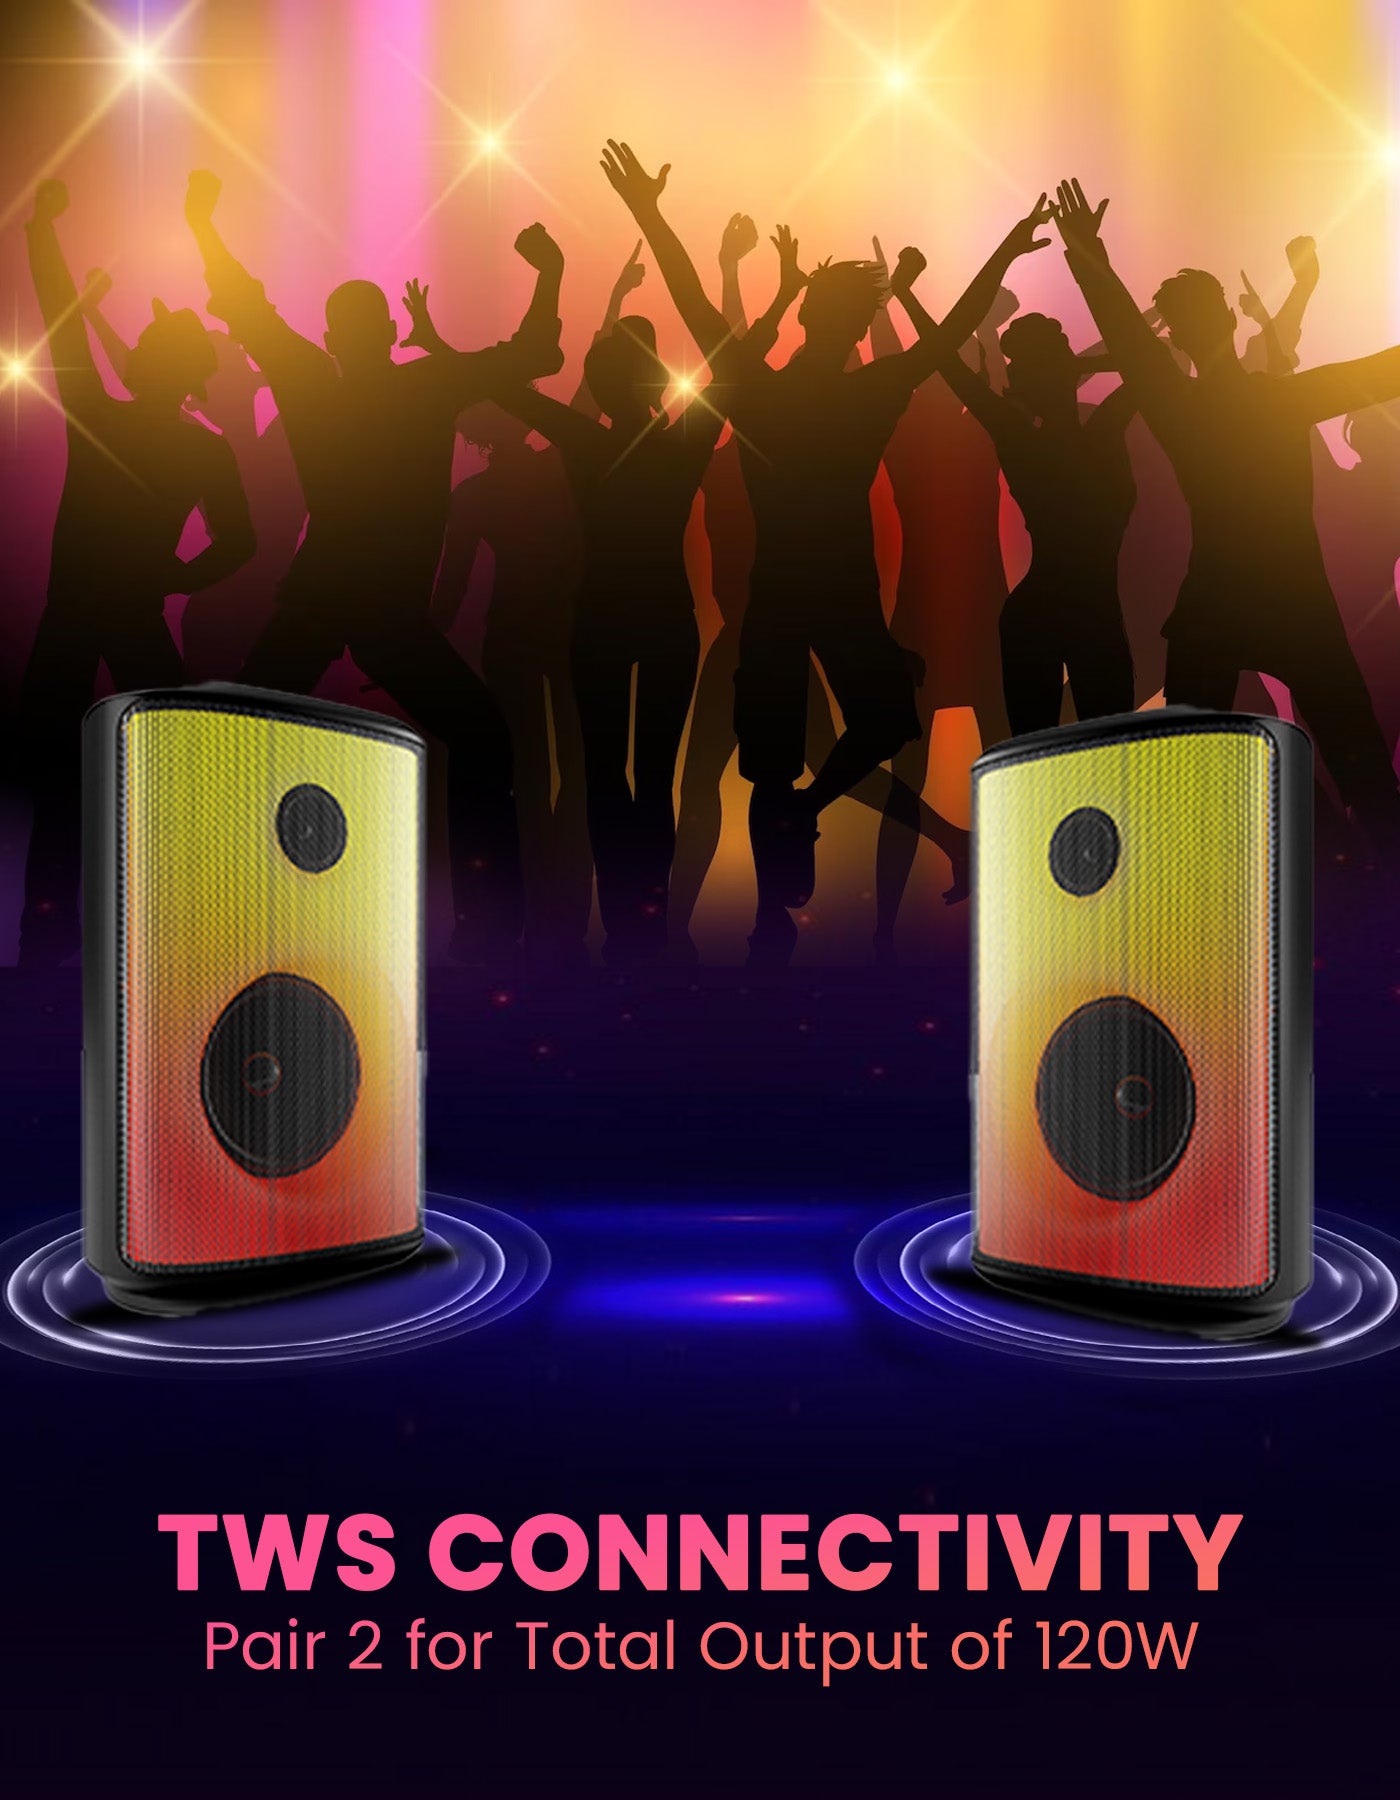 Portronics Dash 8 portable party speaker with flame and regular led lights